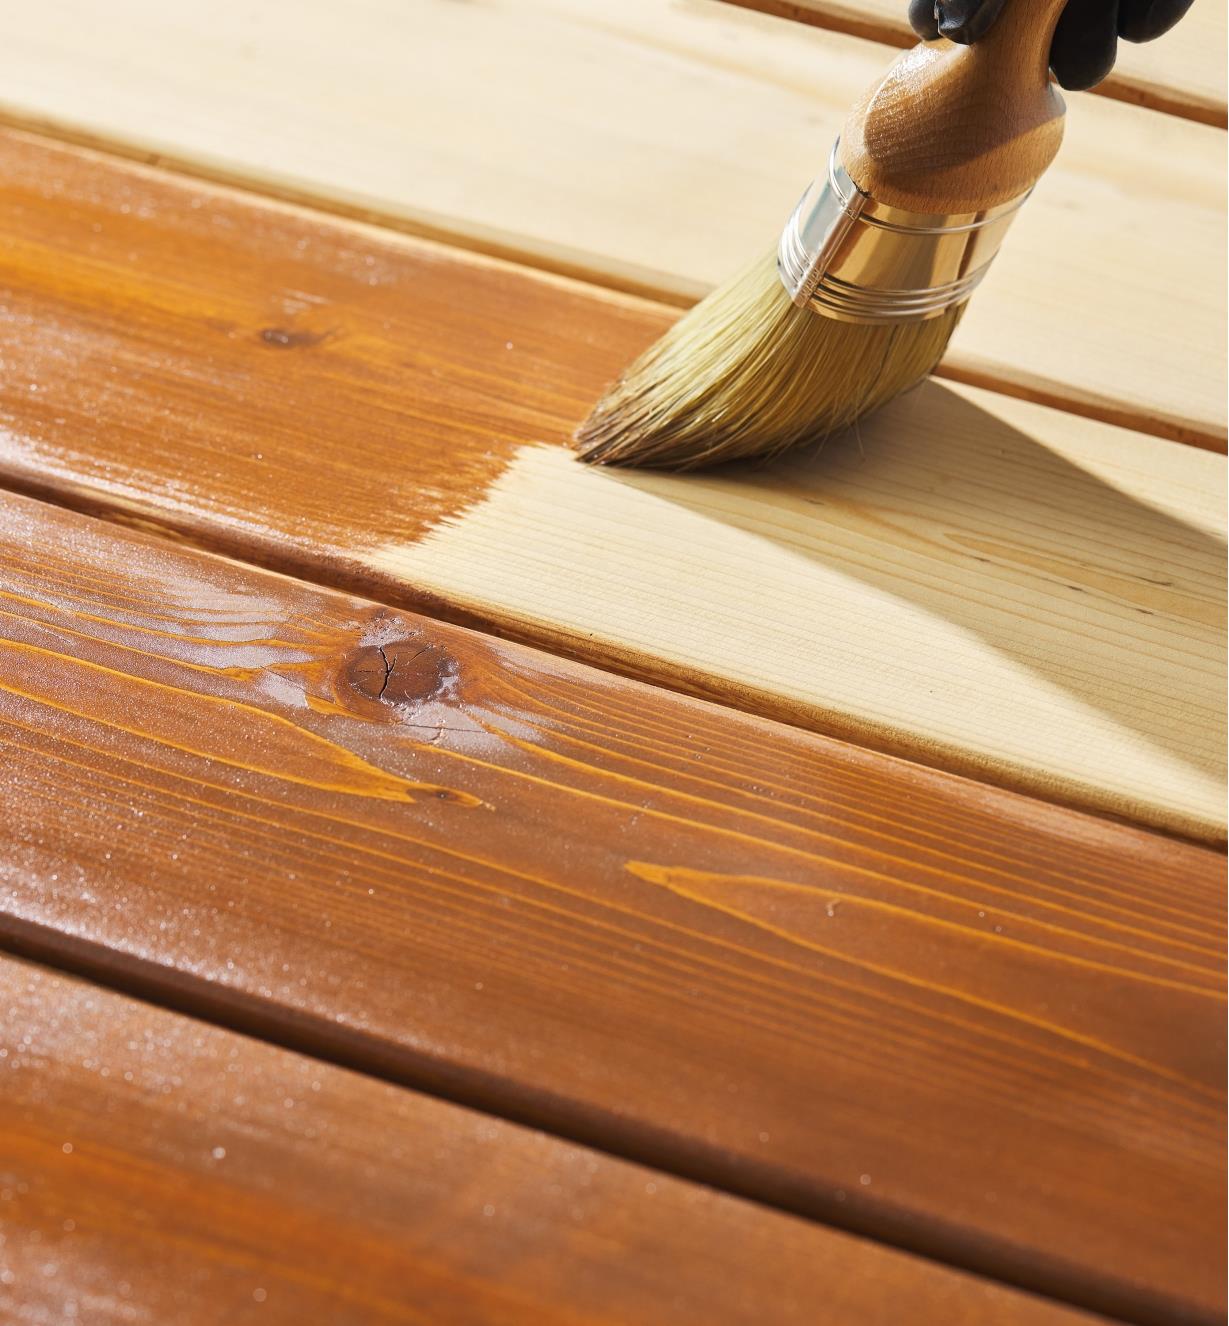 Using a brush to apply Osmo thermowood decking oil to a wooden deck